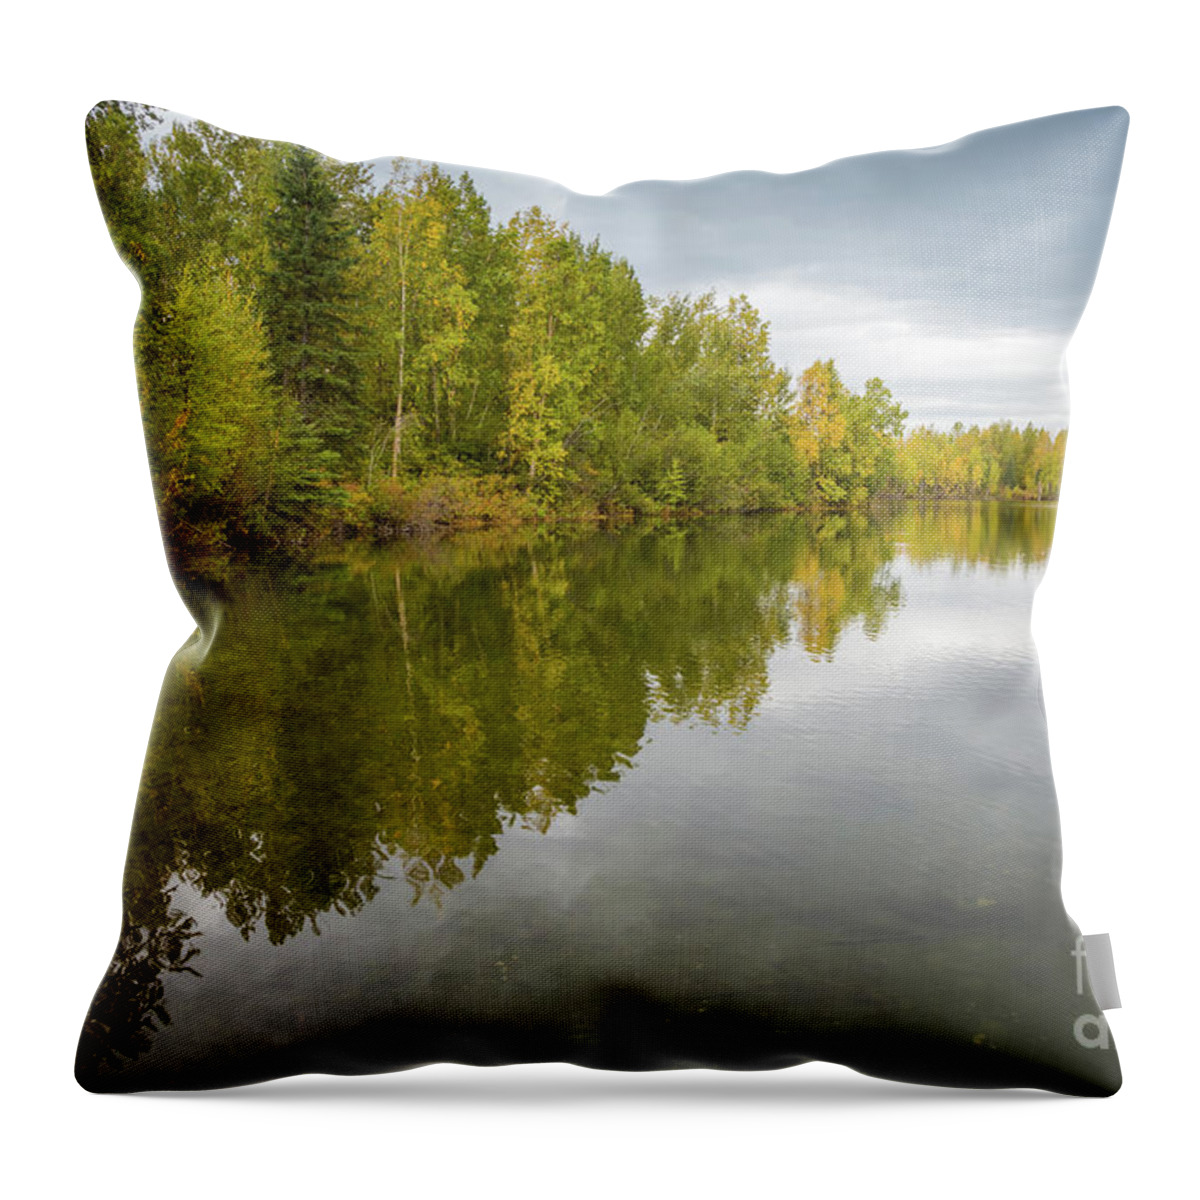 Reflections Lake Throw Pillow featuring the photograph Scenic Reflections Lake by Eva Lechner